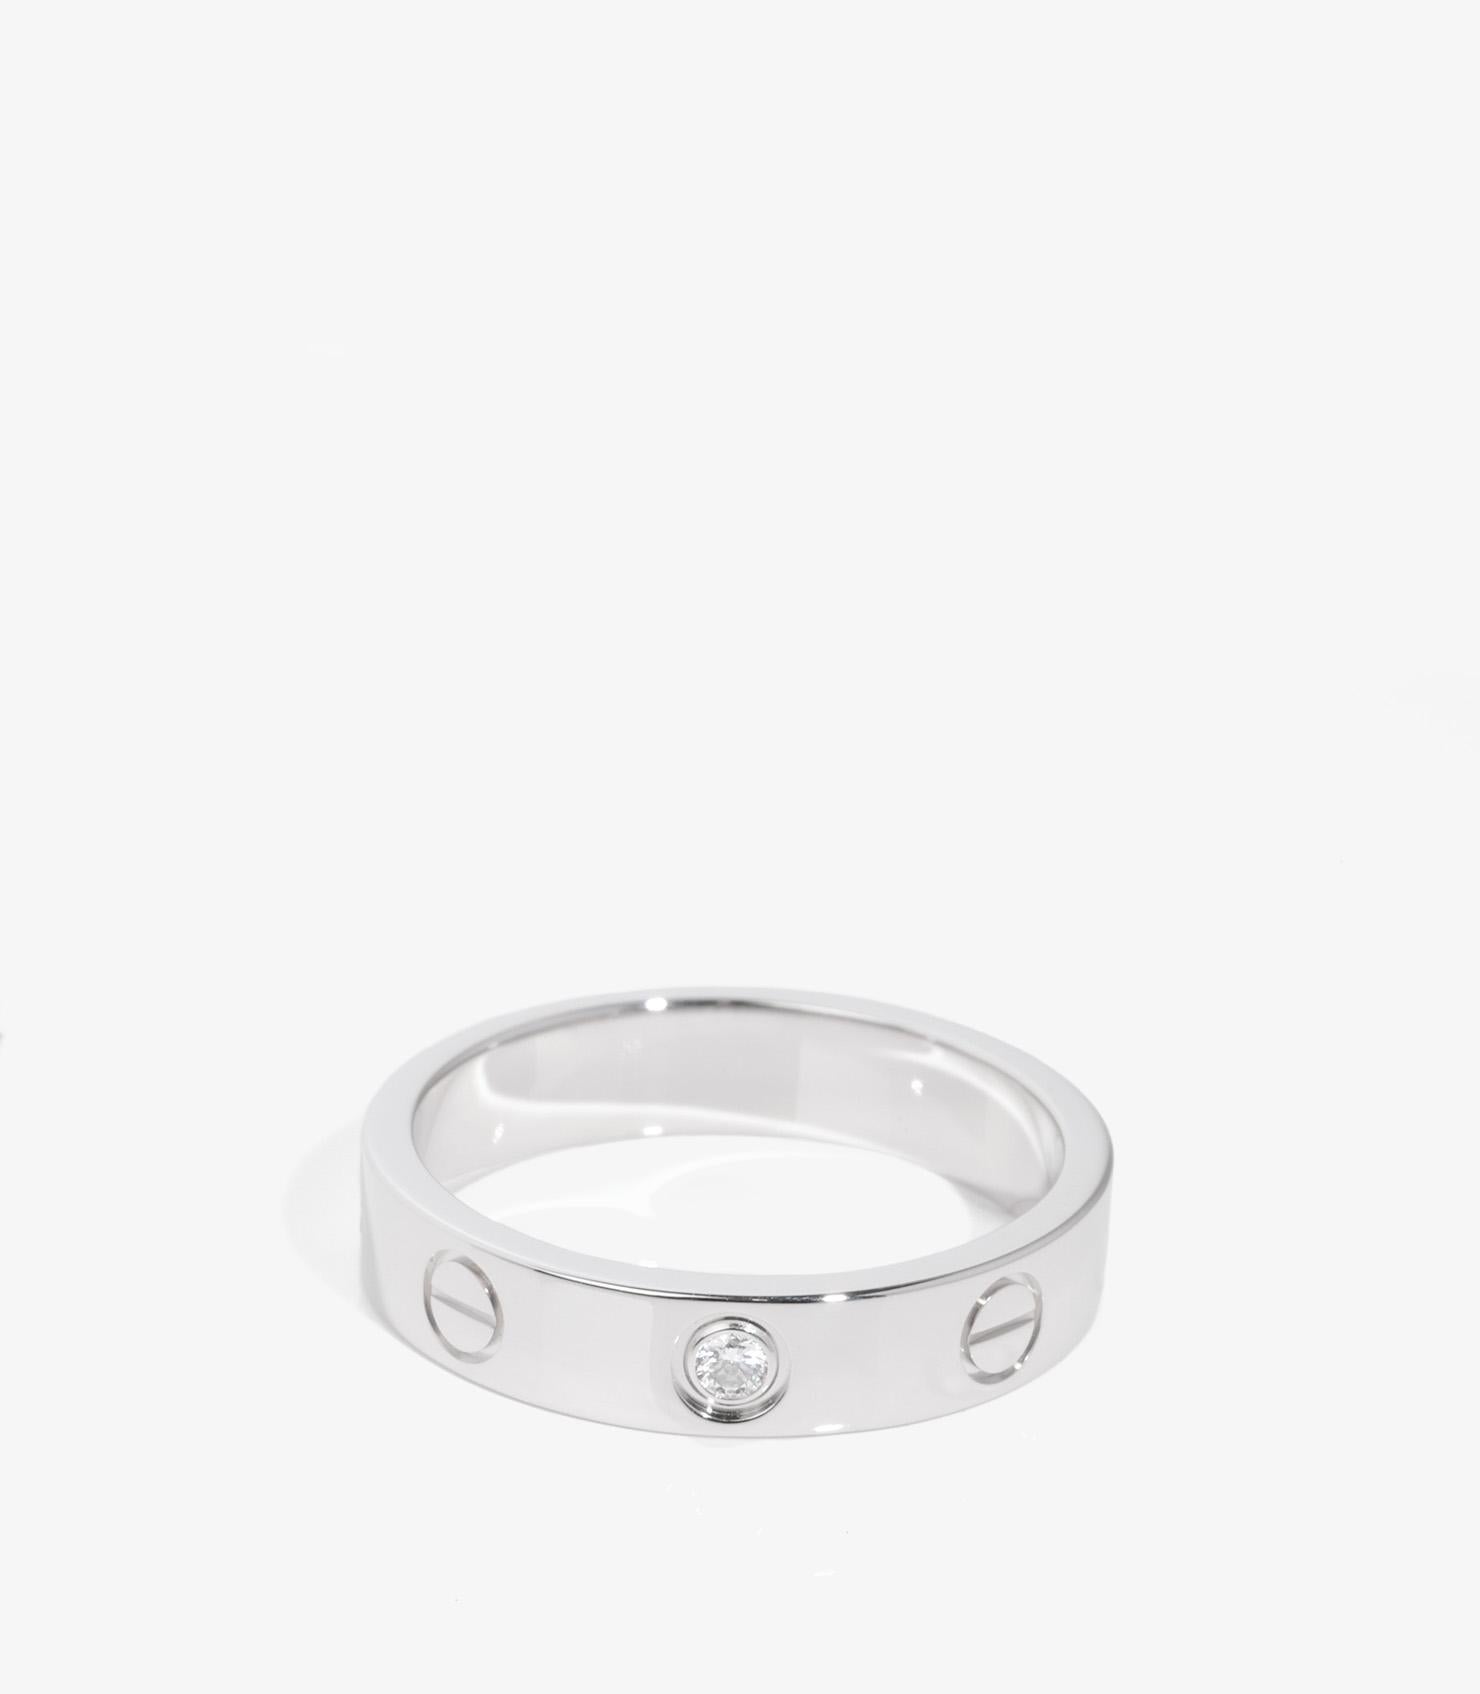 Cartier 1 Diamond 18ct White Gold Love Wedding Band Ring

Brand- Cartier
Model- 1 Diamond Love Wedding Band
Product Type- Ring
Serial Number- OX****
Age- Circa 2011
Accompanied By- Cartier Certificate
Material(s)- 18ct White Gold
Gemstone-